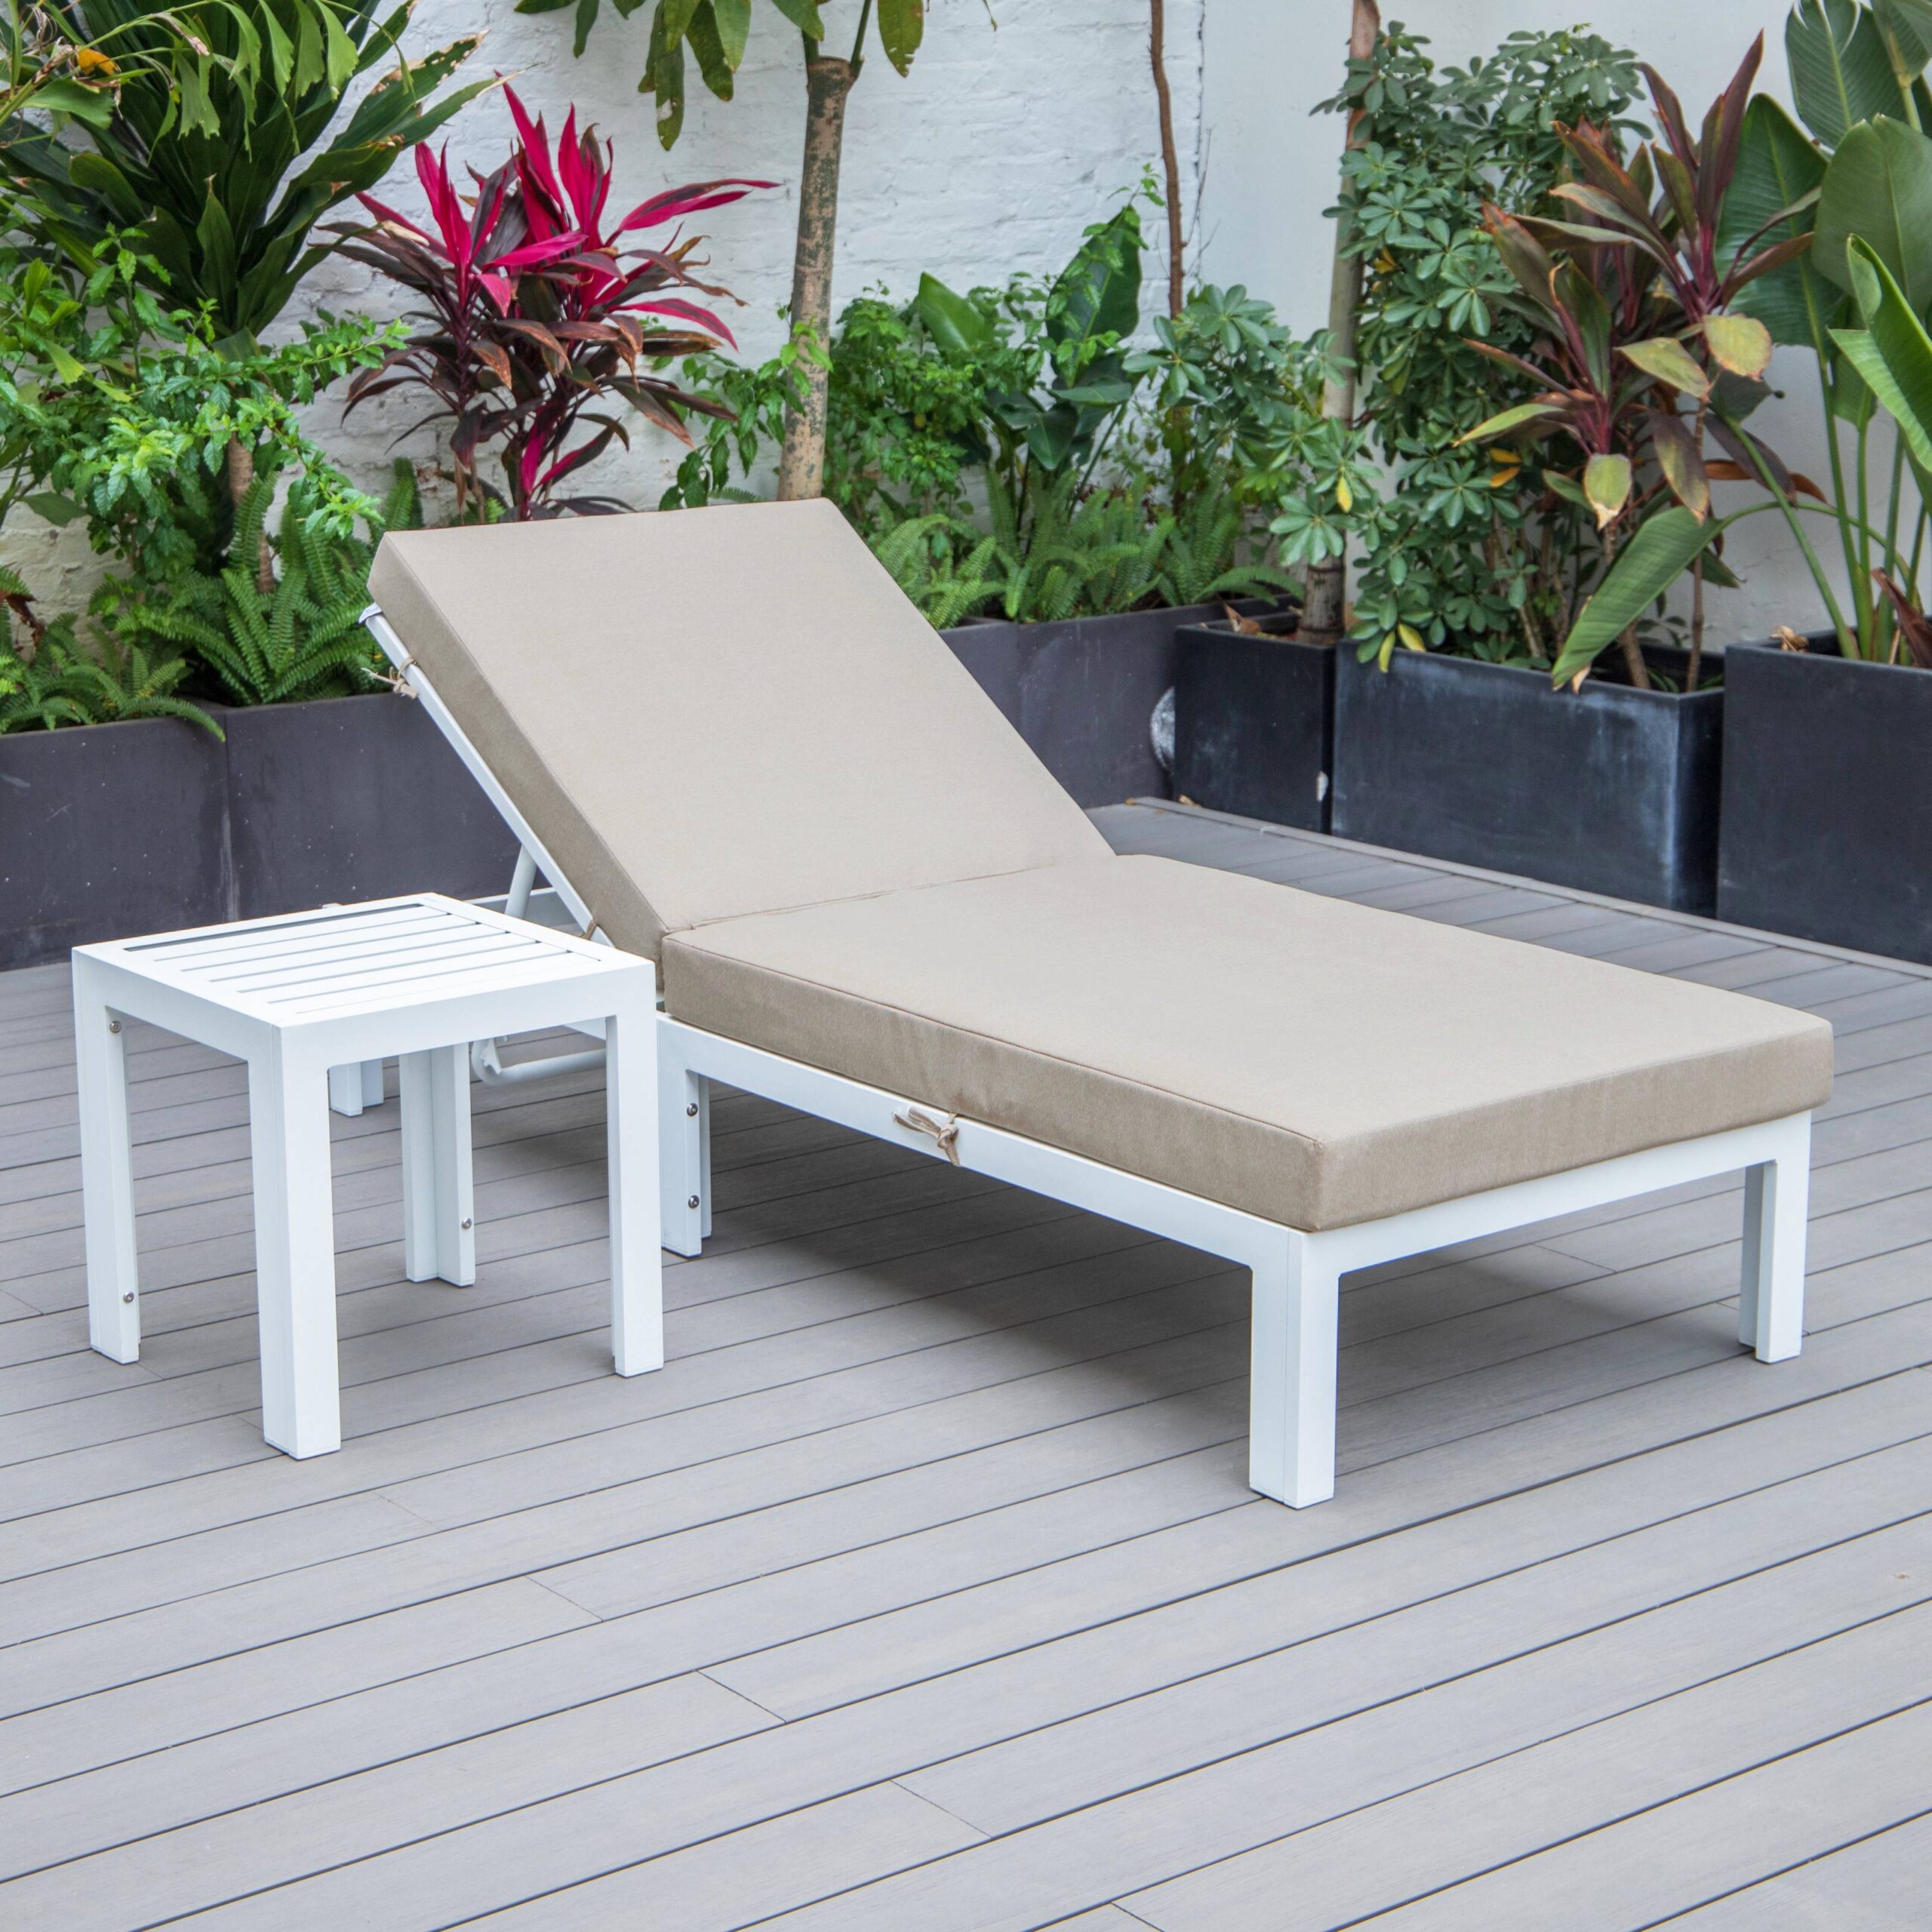 LeisureMod Chelsea Modern Weathered Grey Aluminum Outdoor Chaise Lounge Chair With Side Table & Beige Cushions - image 2 of 13